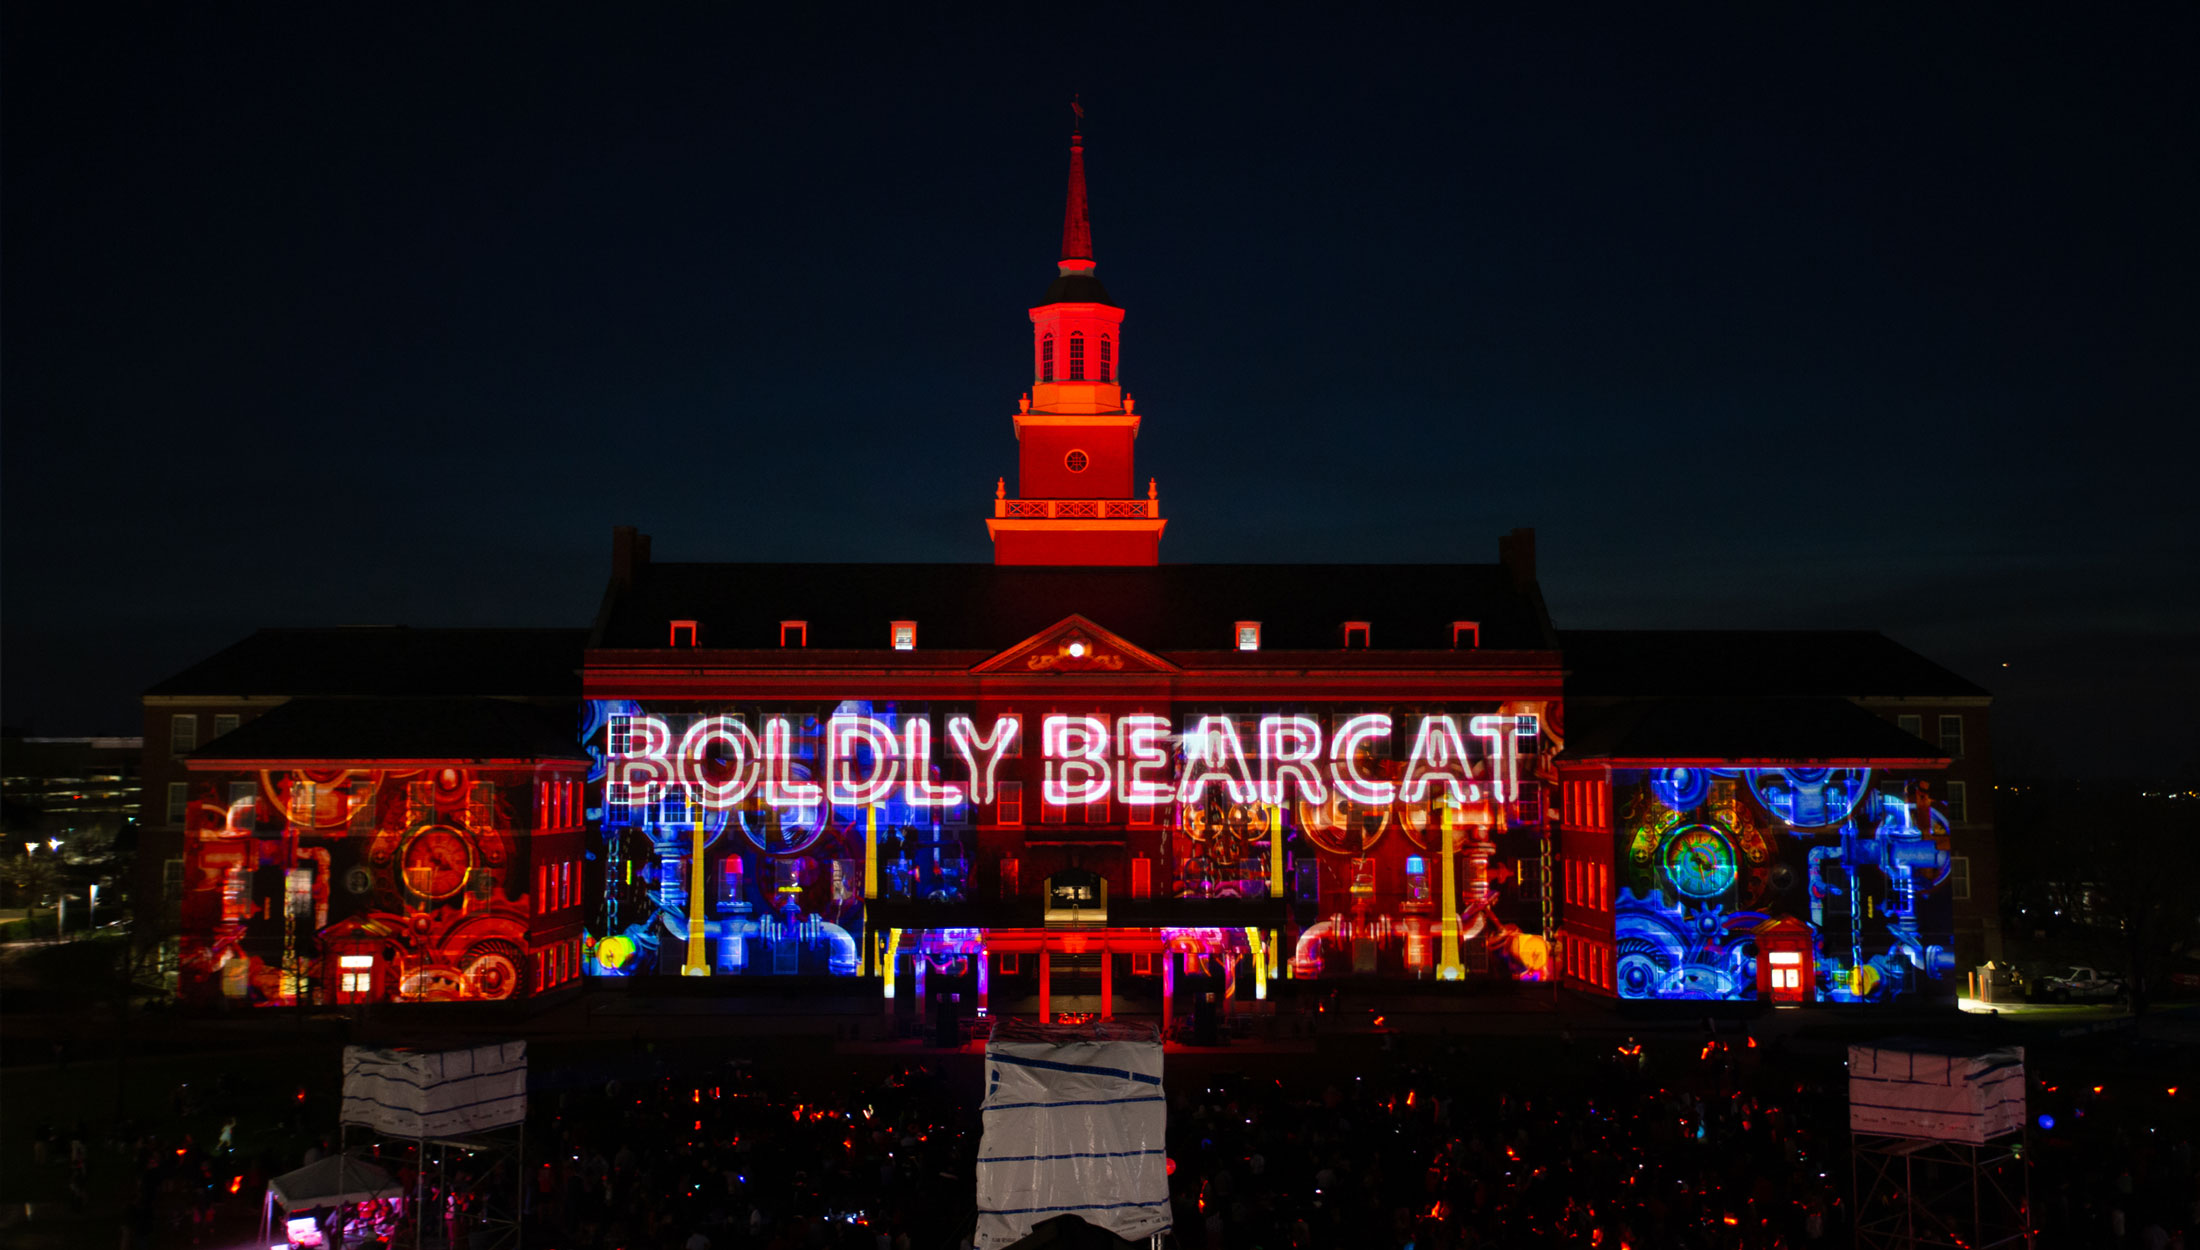 UC's Momentum Light show, projected on to a building facade